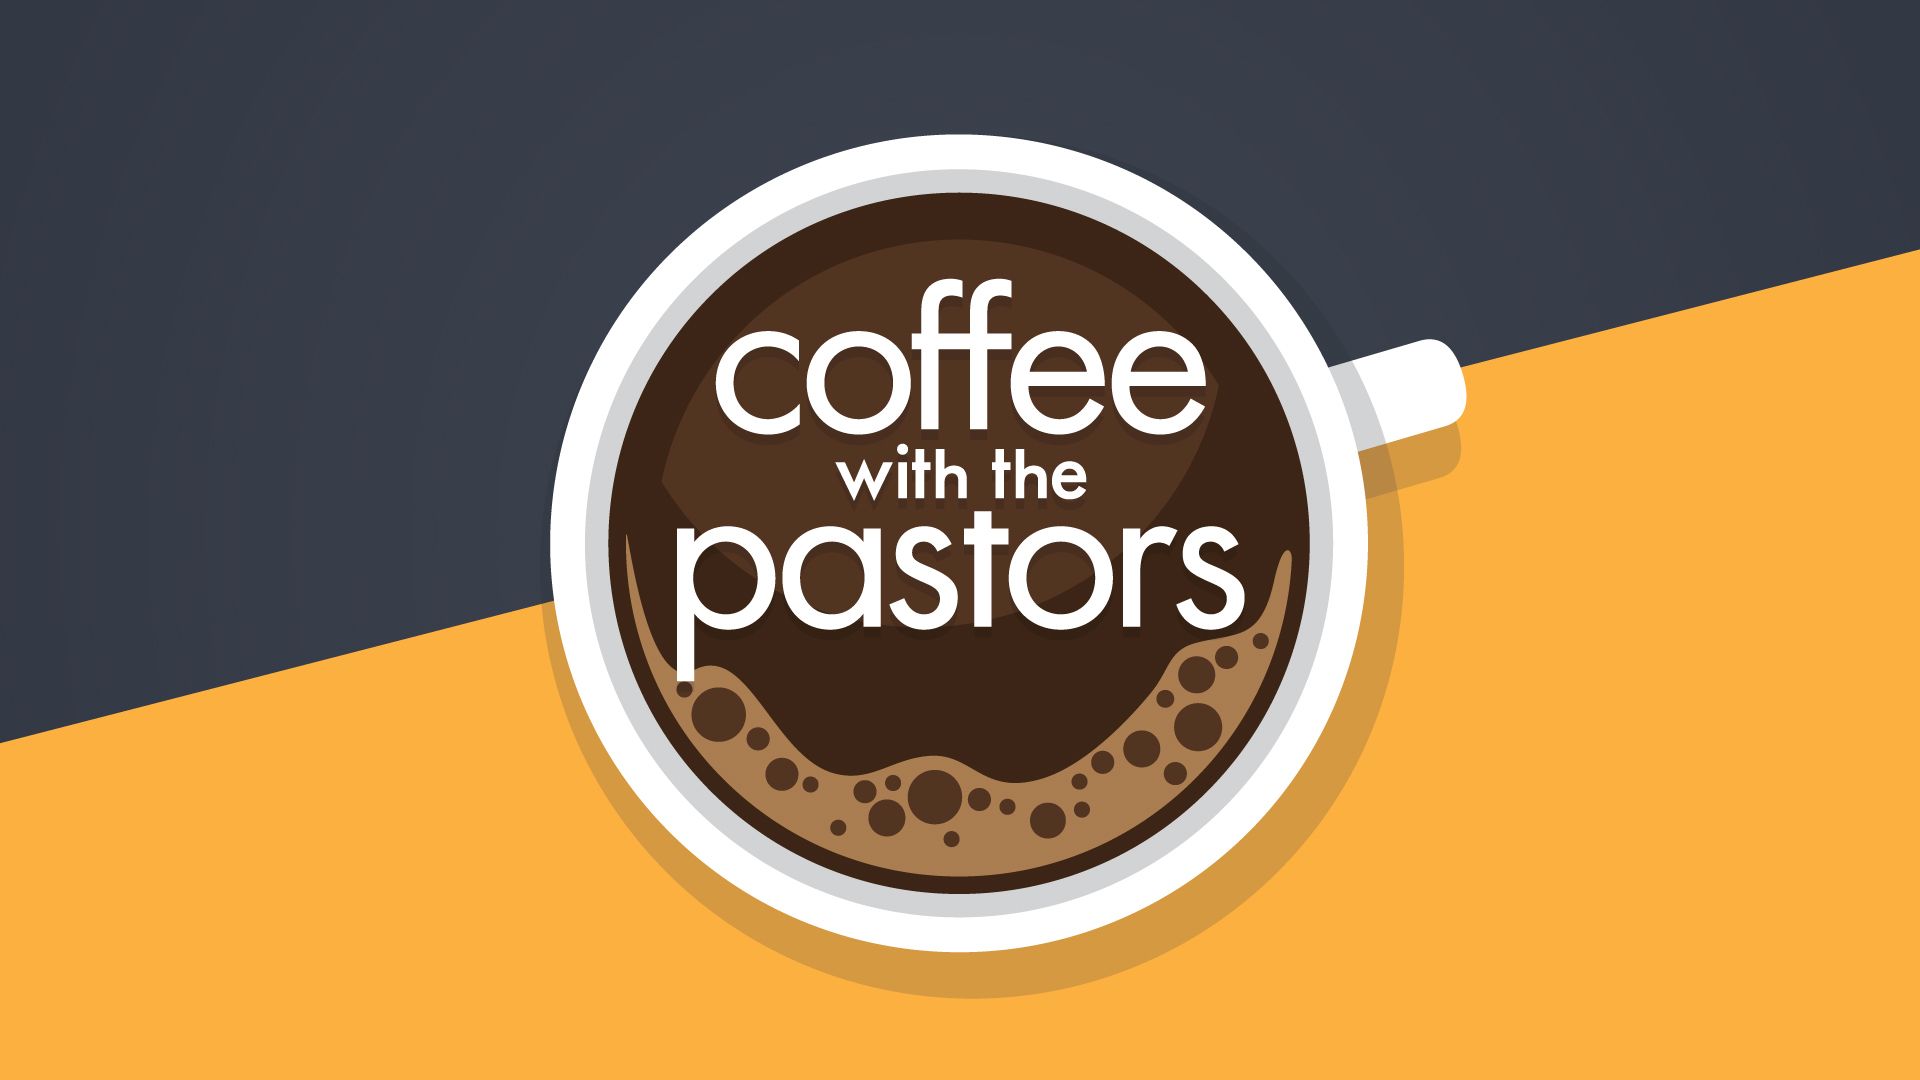 Coffee with the Pastors - 1920x1080